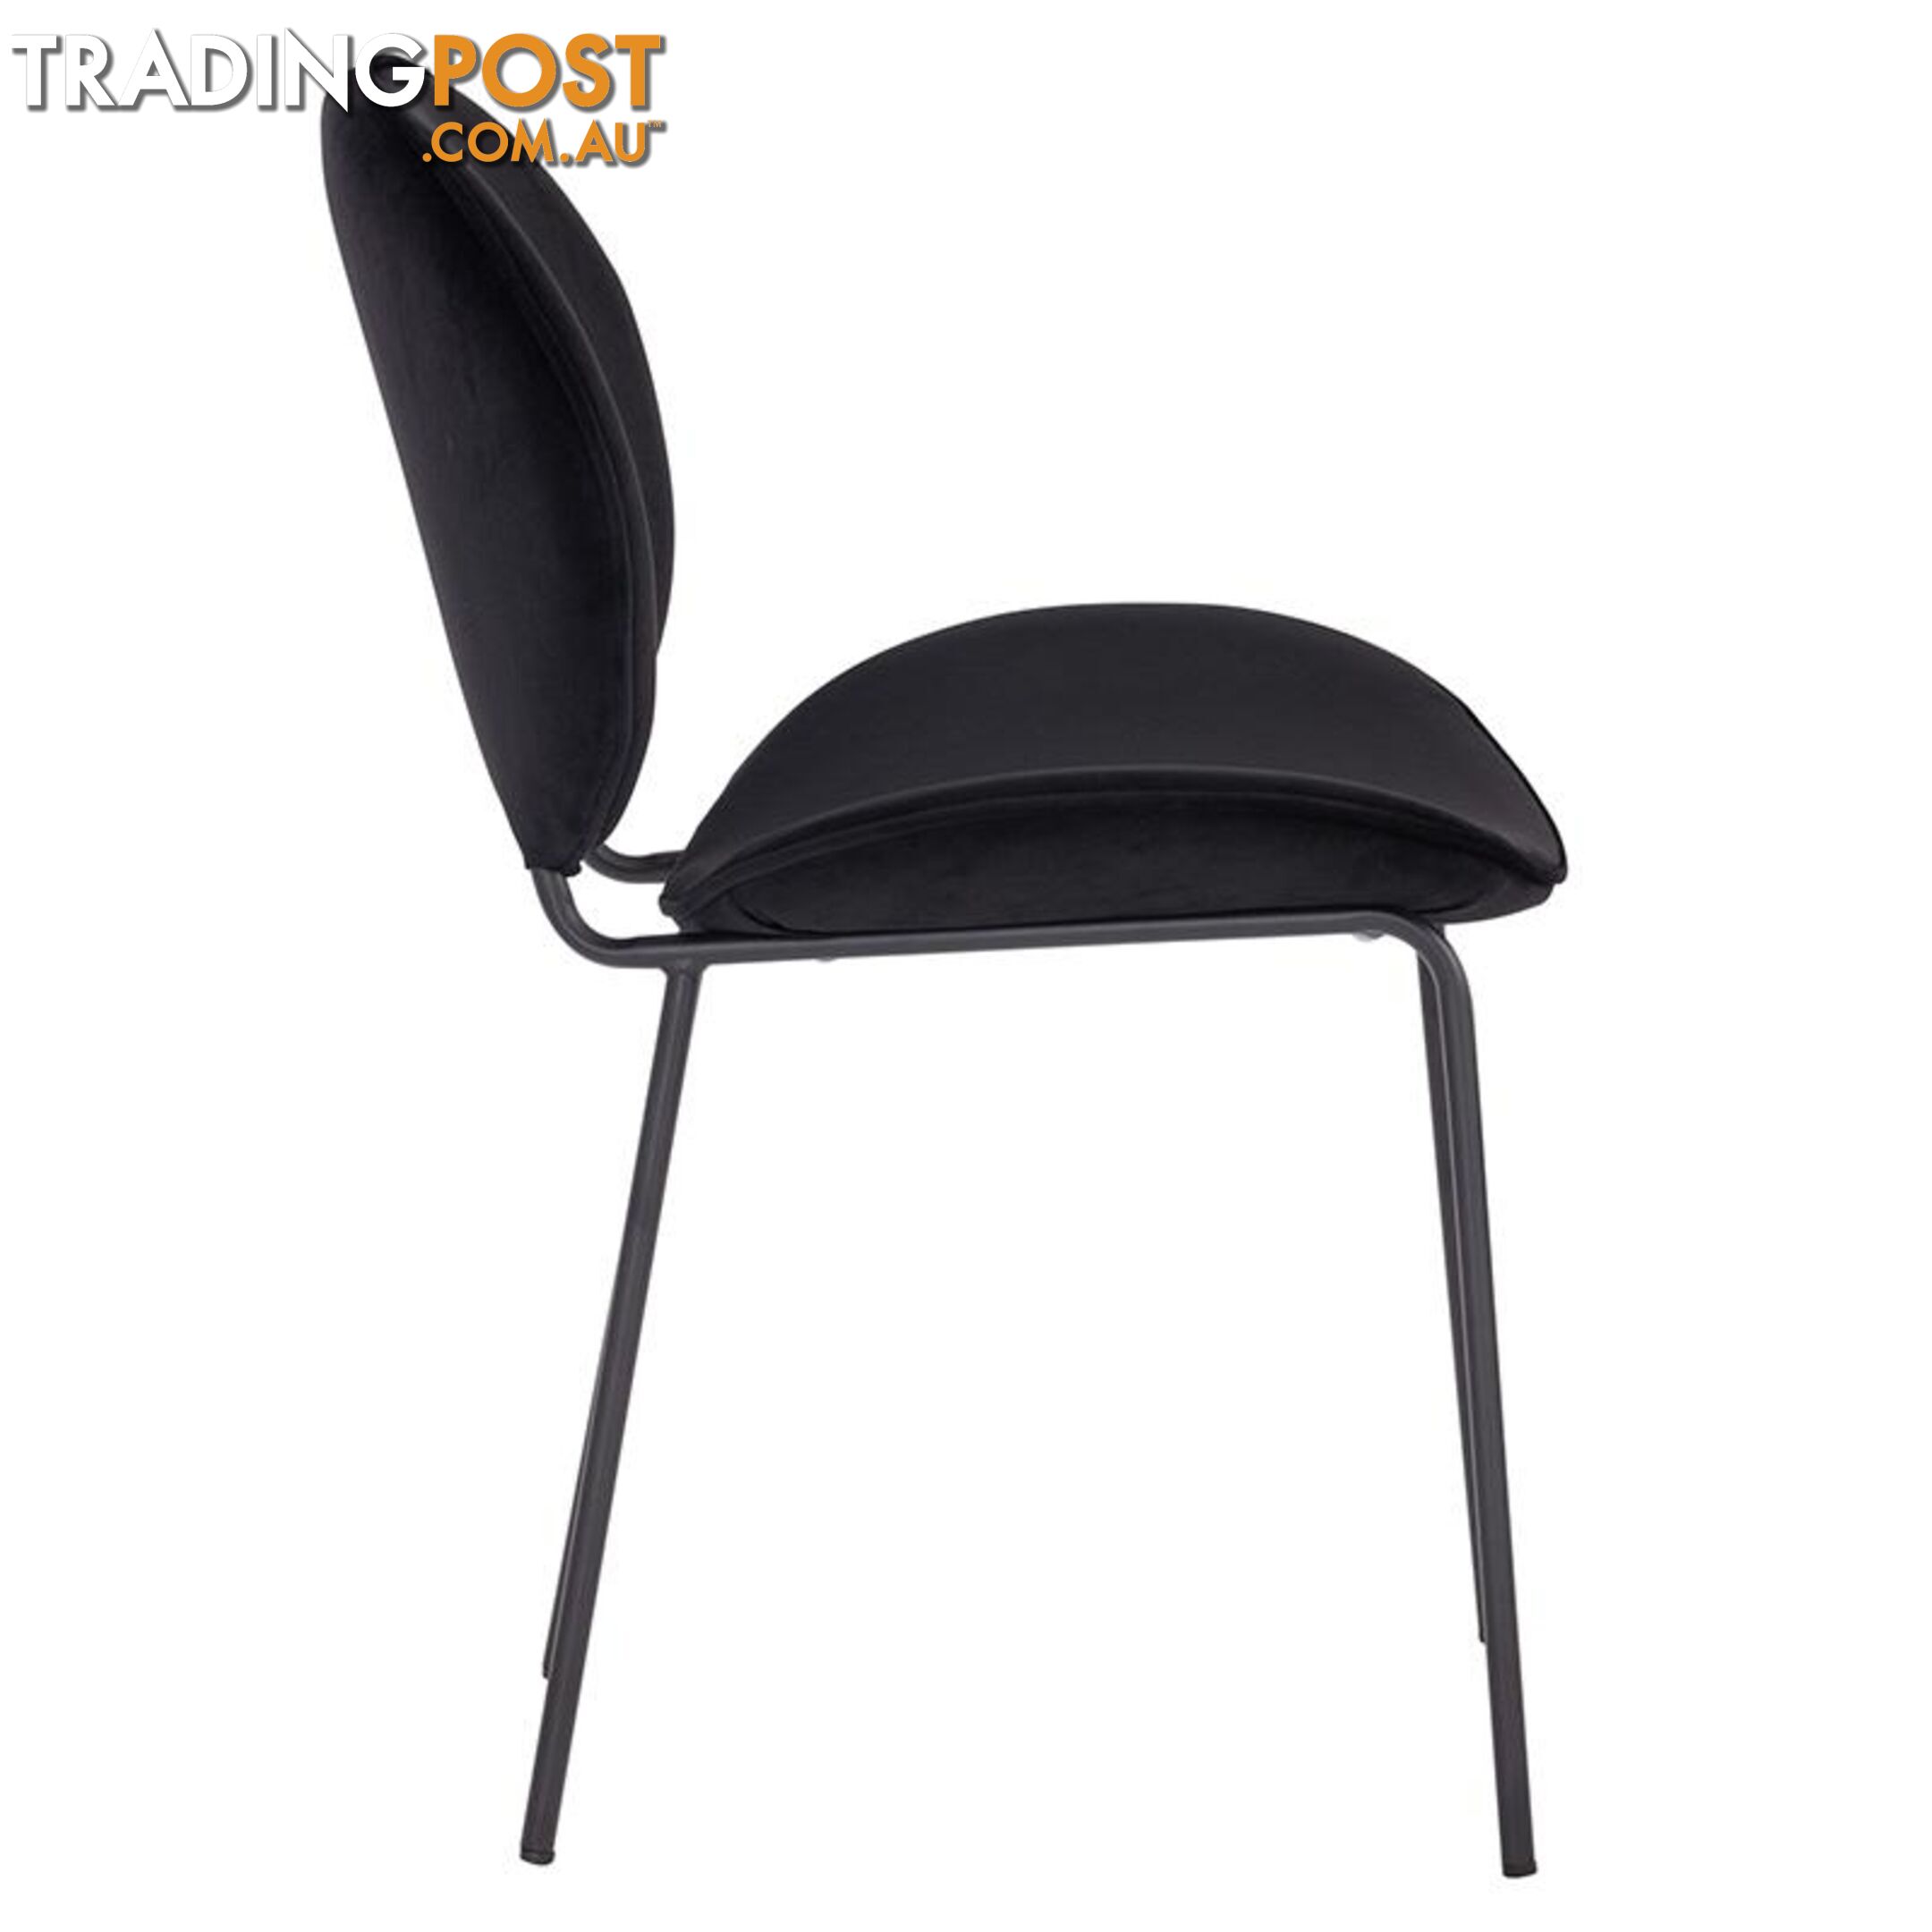 ORMER Dining Chair - Black - 241243 - 9334719010618